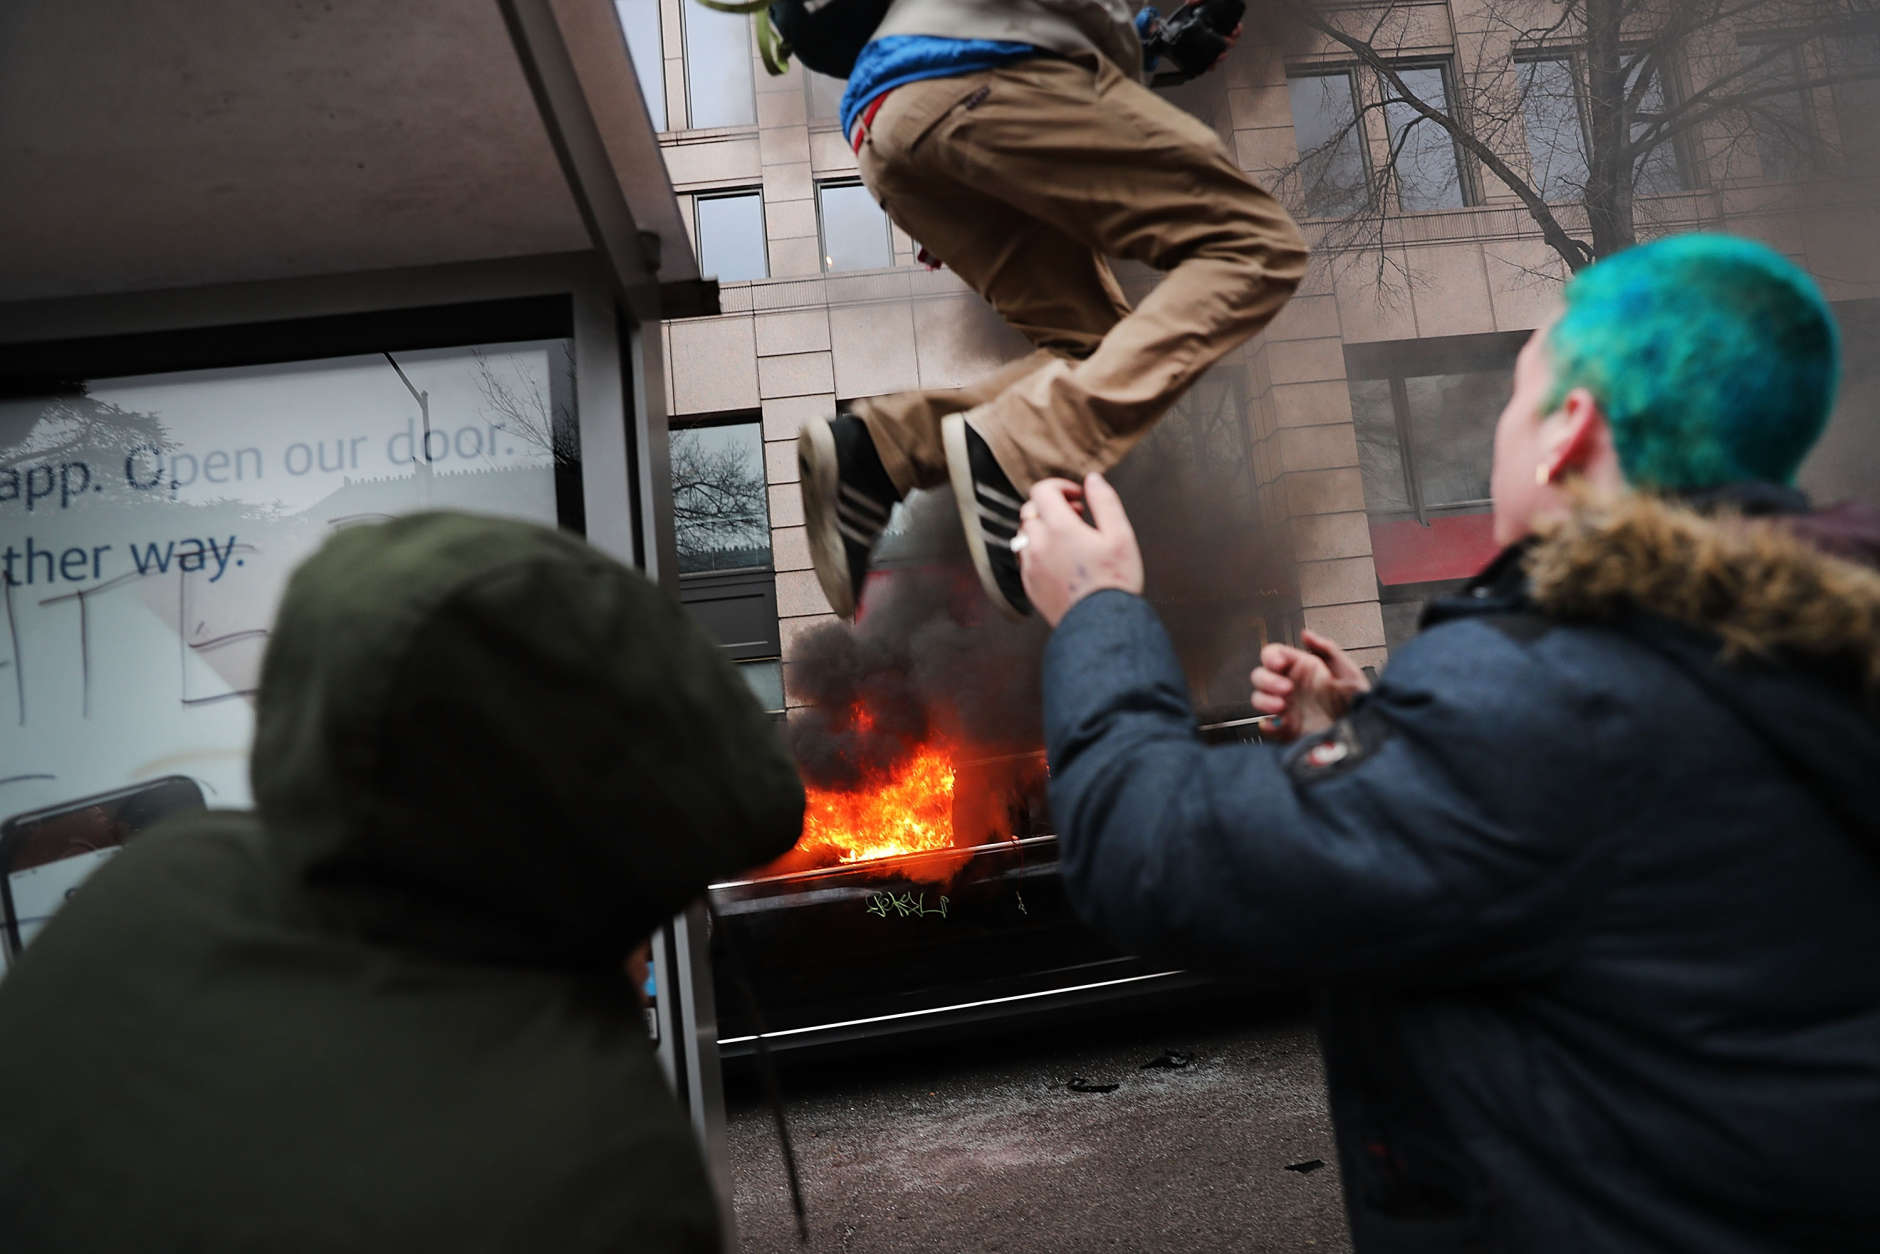 WASHINGTON, DC - JANUARY 20:  Police and demonstrators clash in downtown Washington after a limo was set on fire following the inauguration of President Donald Trump on January 20, 2017 in Washington, DC. Washington and the entire world have watched the transfer of the United States presidency from Barack Obama to Donald Trump, the 45th president.  (Photo by Spencer Platt/Getty Images)